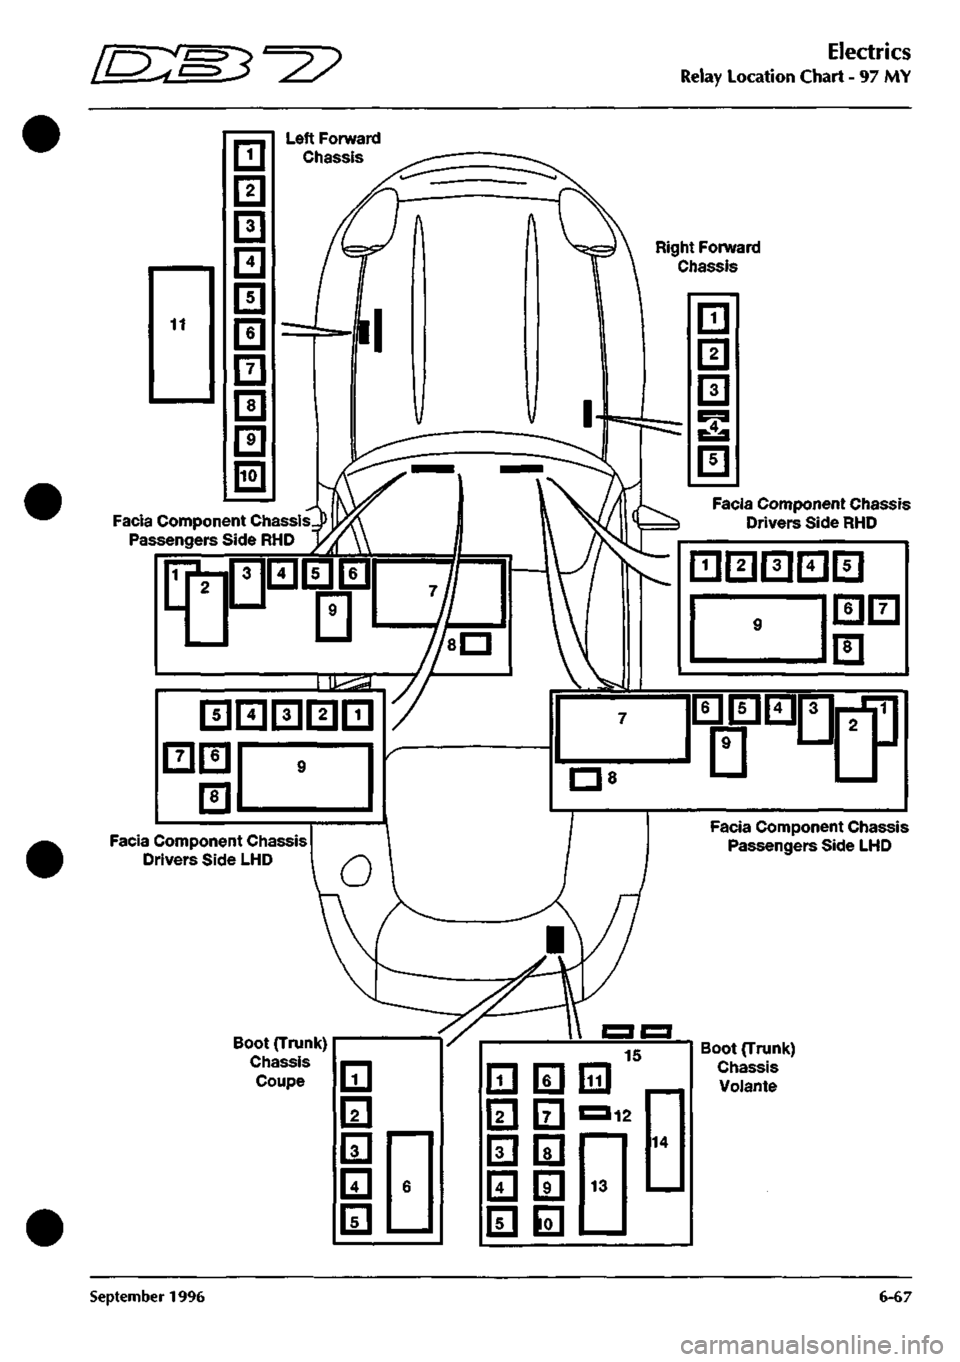 ASTON MARTIN DB7 1997  Workshop Manual 
^^? 
Electrics 
Relay Location Chart - 97 MY 
Right Forward 
Chassis 
Facia Component Chassis 
Passengers Side RHD 
Facia Component Chassis 
Drivers Side LliD 
Boot (Trunk) 
Chassis 
Coupe 111 
I2I 
